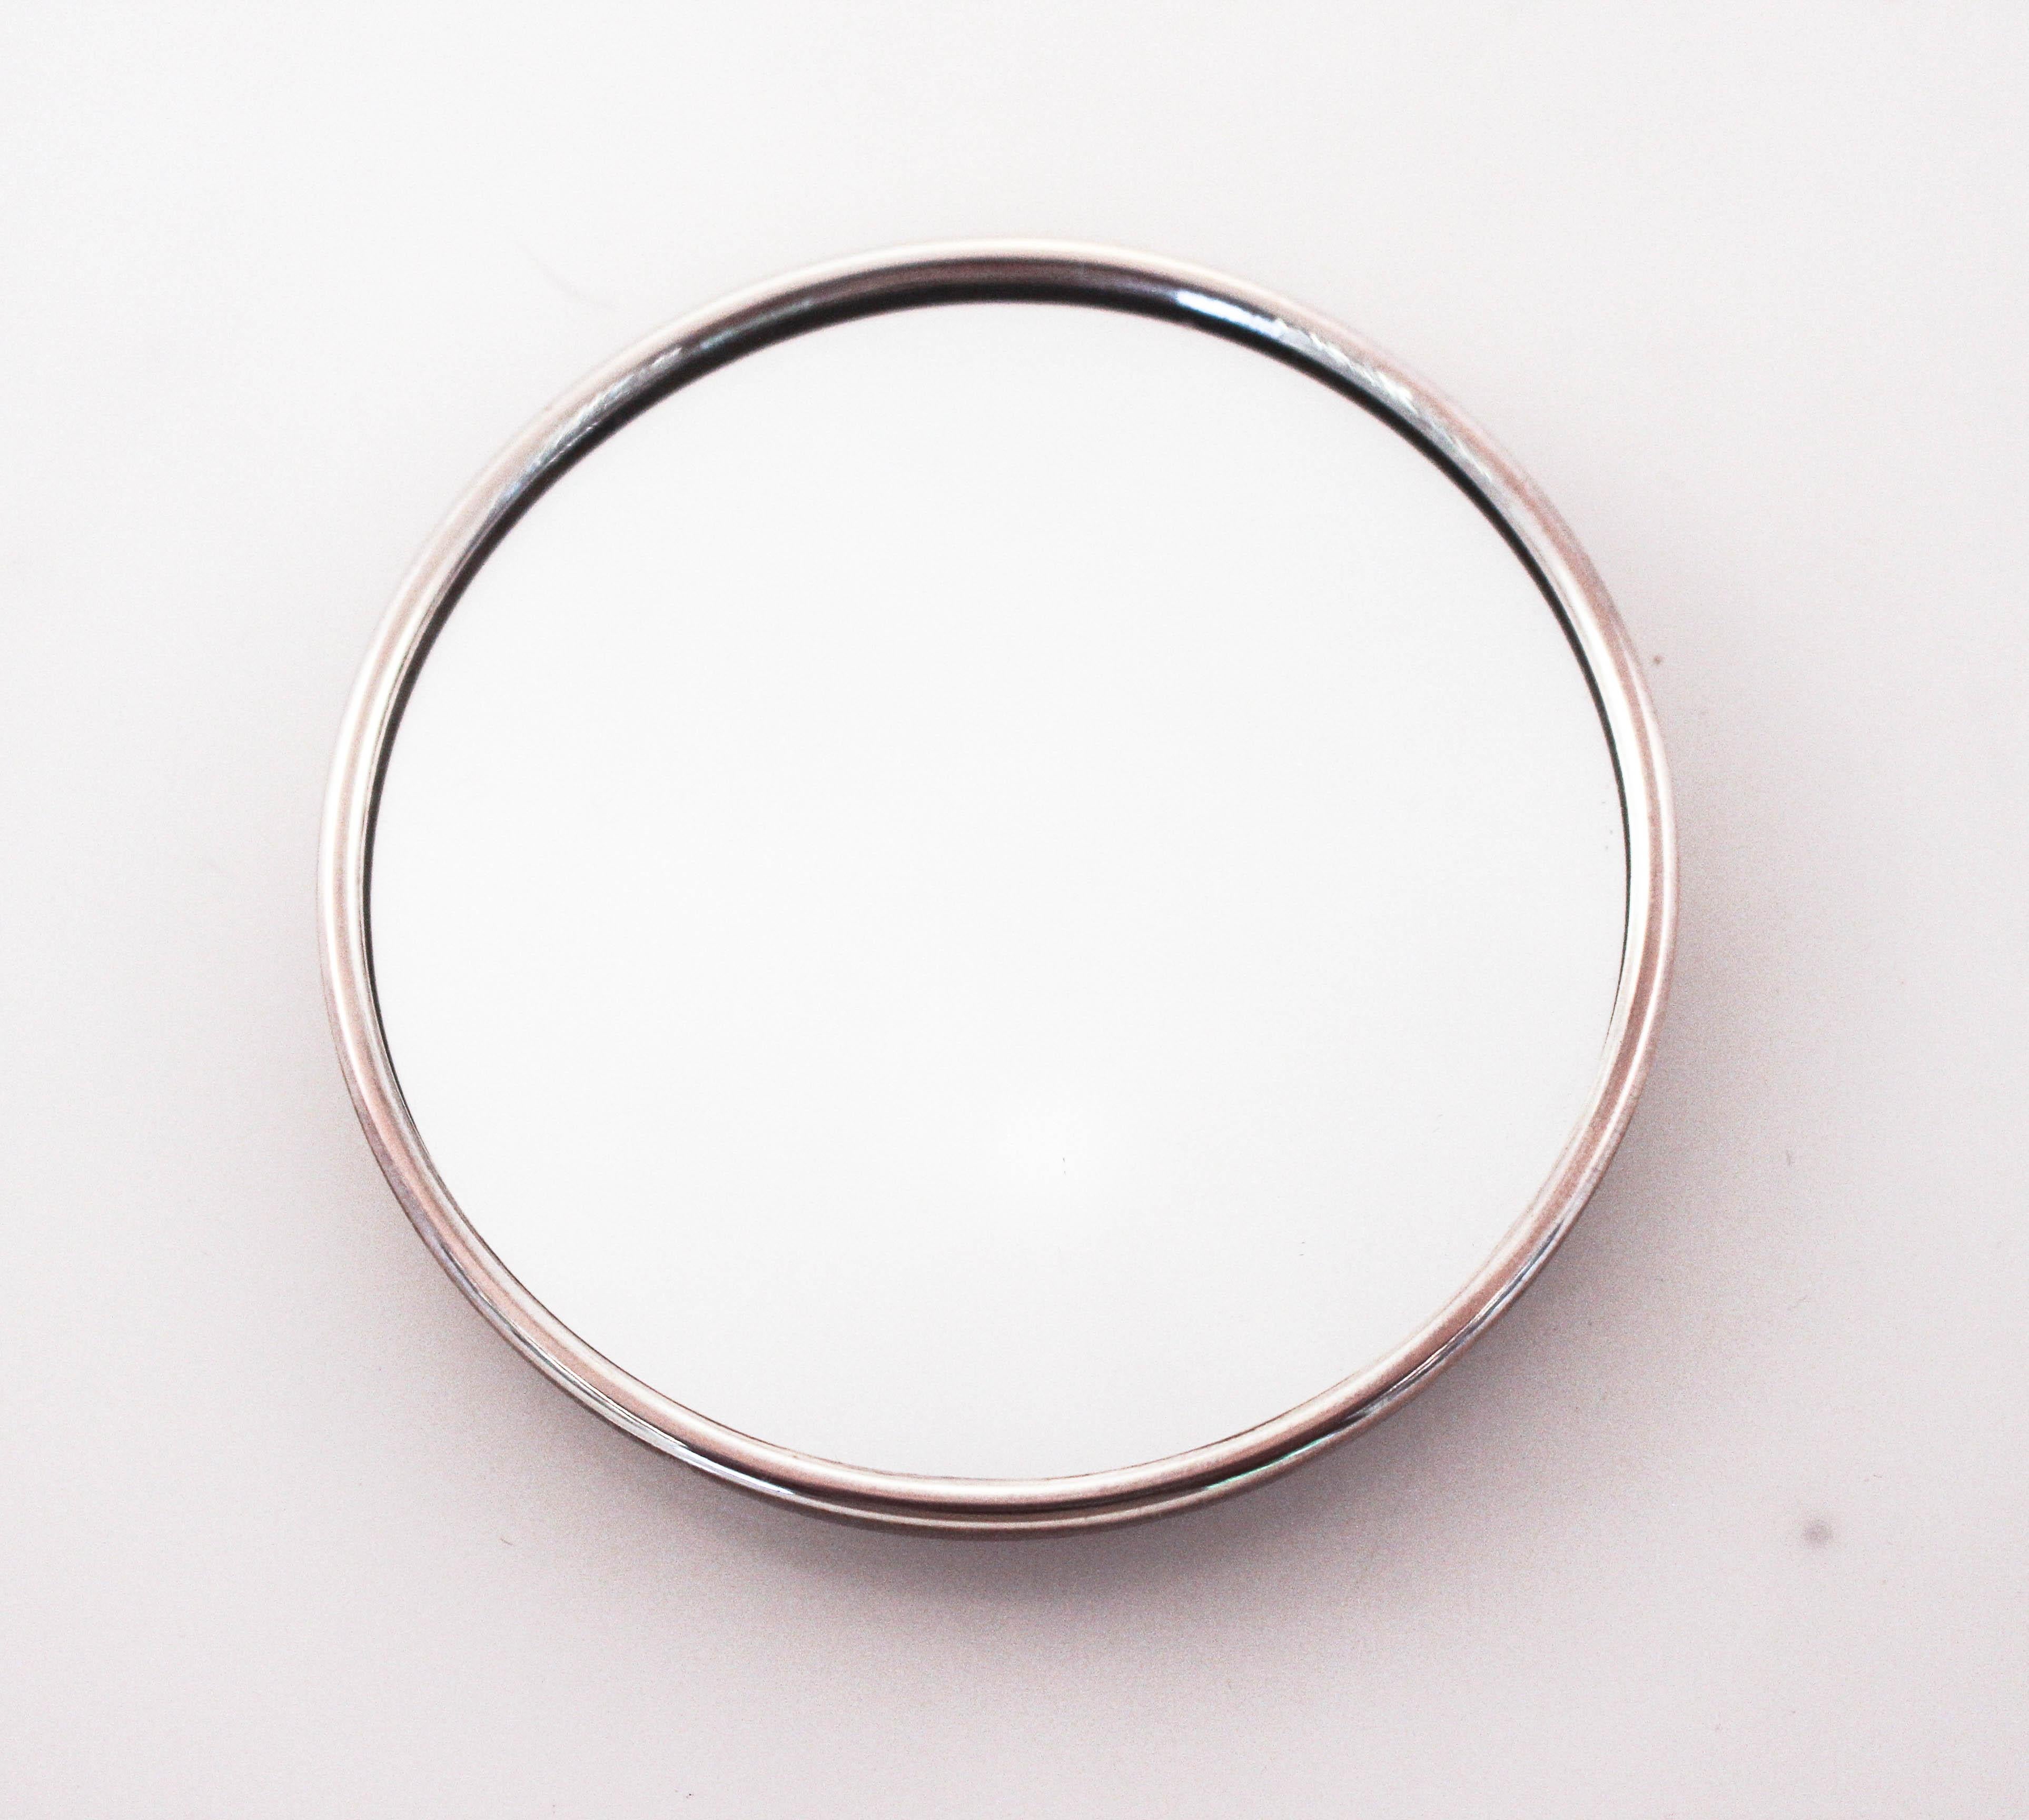 We are offering a brand new sterling silver compact mirror by Lunt Silversmiths. On side is sterling silver while the reverse side is a mirror. The silver has a pattern around the rim, and in the center room for a monogram. The original cloth sack